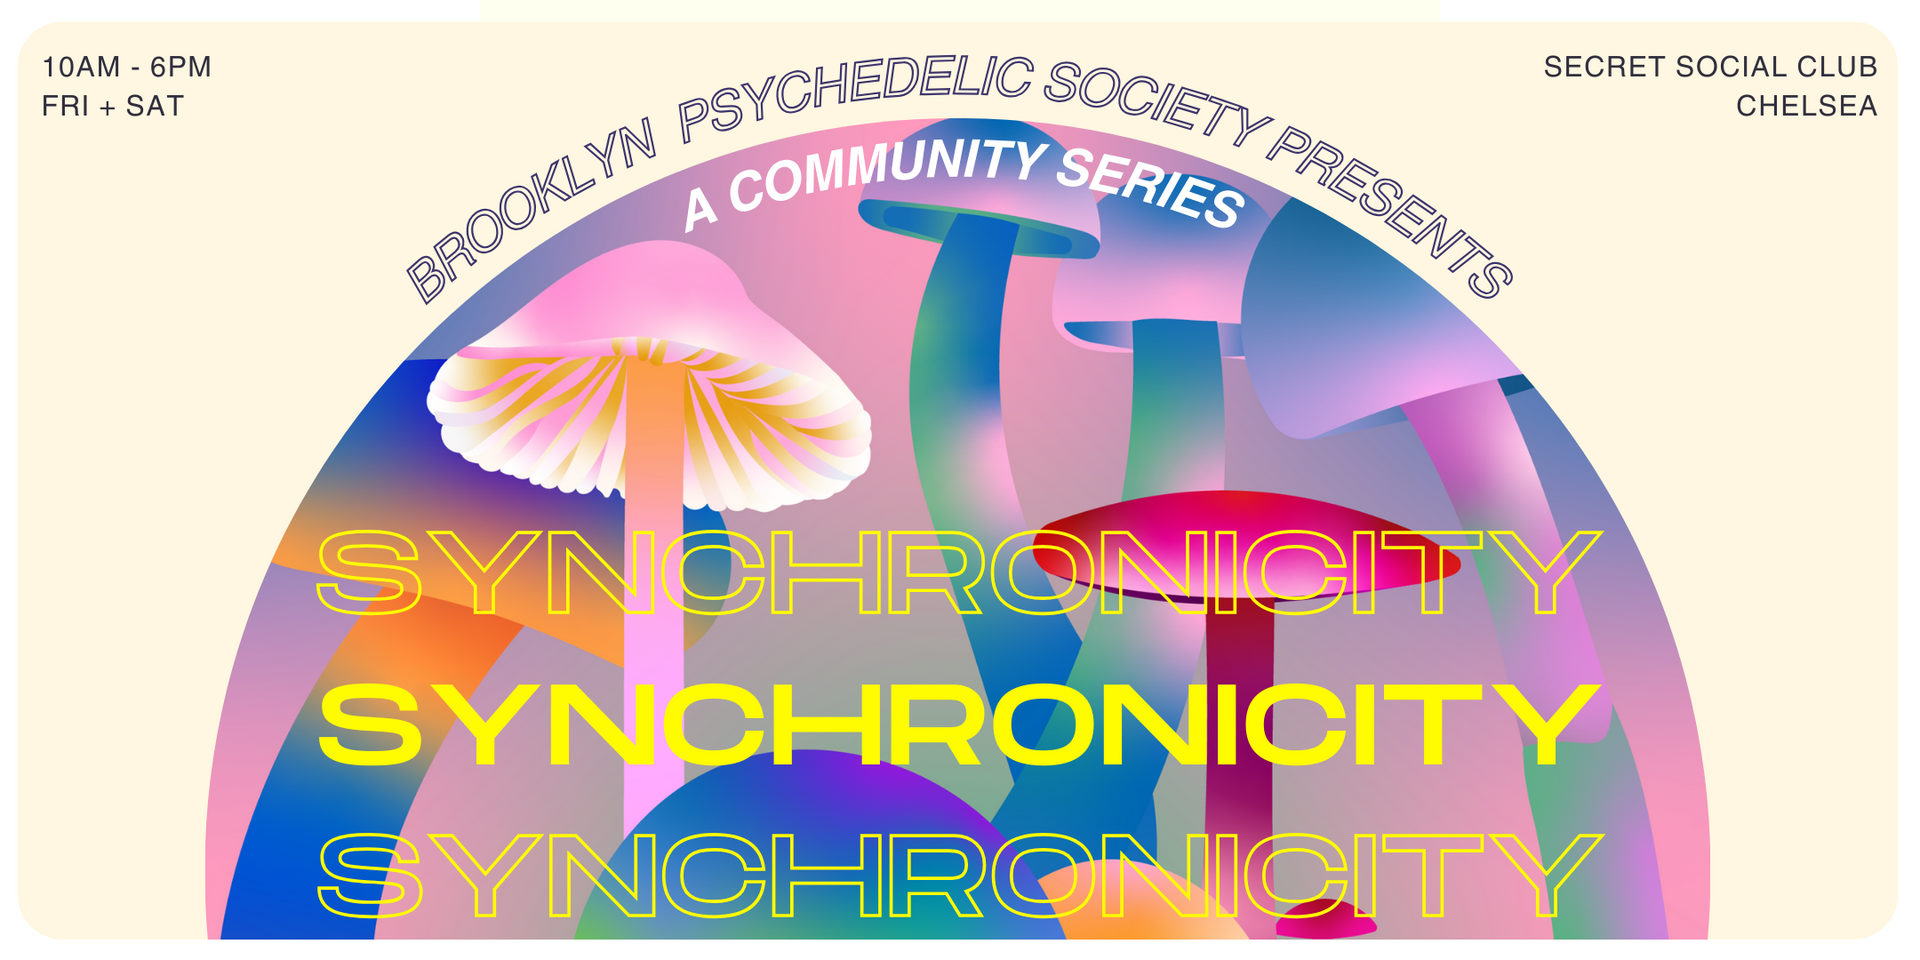 A poster for a community series called synchronicity synchronicity.